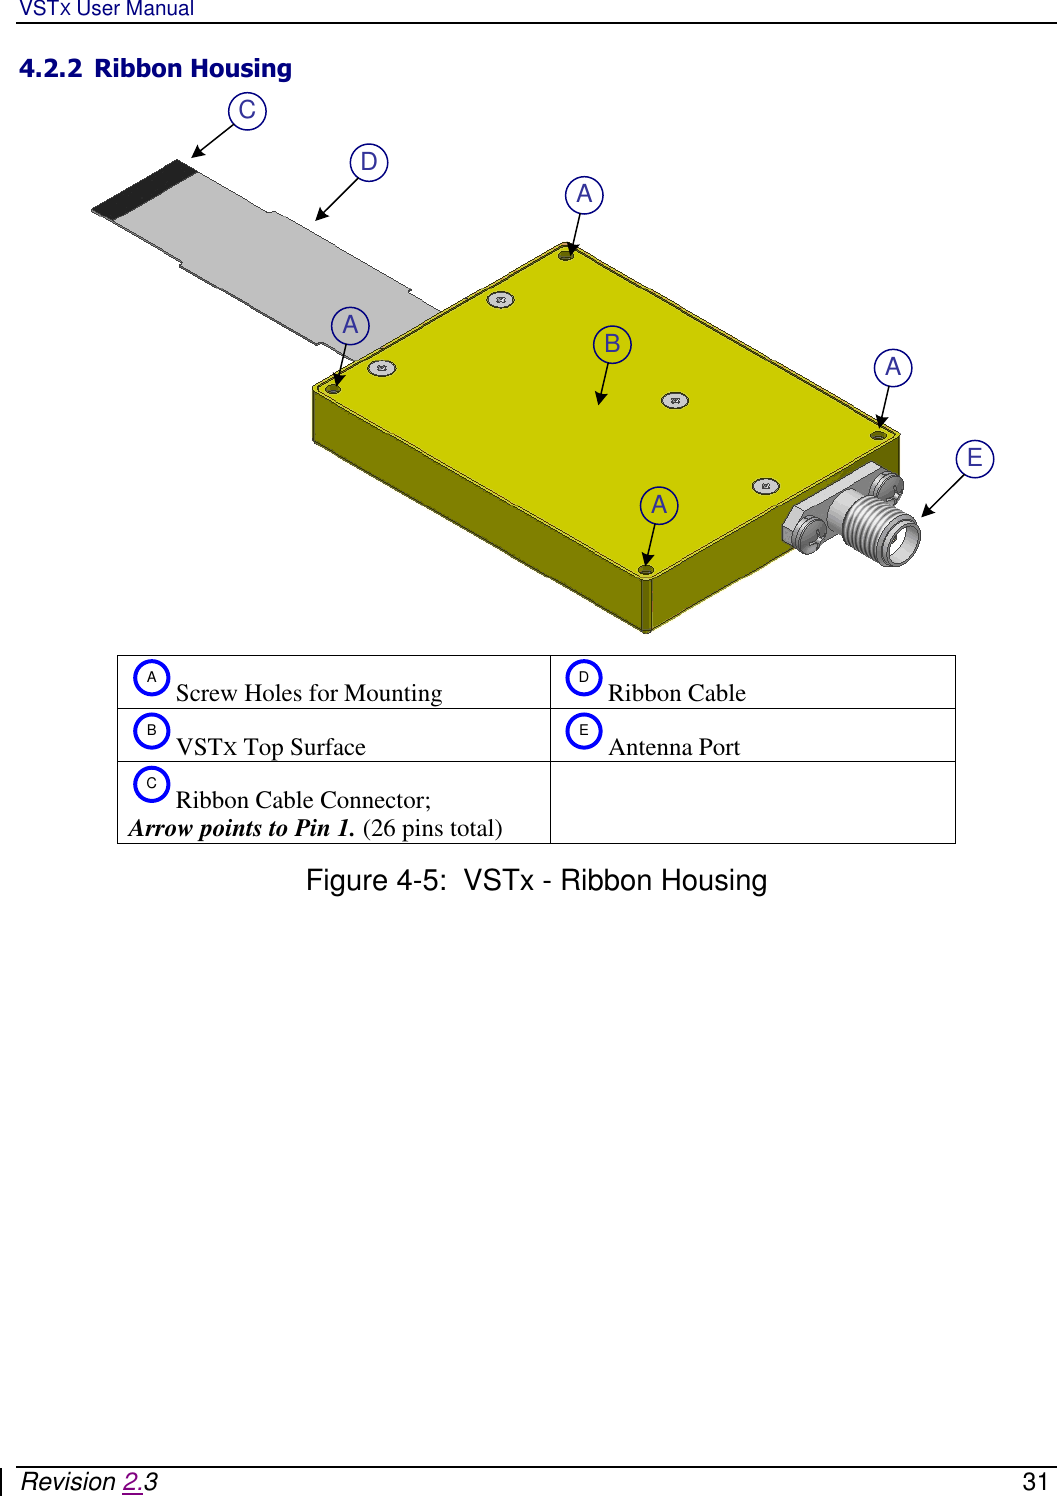 VSTX User Manual   Revision 2.3    31 4.2.2 Ribbon Housing  CDAAAABE AScrew Holes for Mounting DRibbon Cable BVSTX Top Surface EAntenna Port CRibbon Cable Connector;  Arrow points to Pin 1. (26 pins total)   Figure 4-5:  VSTx - Ribbon Housing 